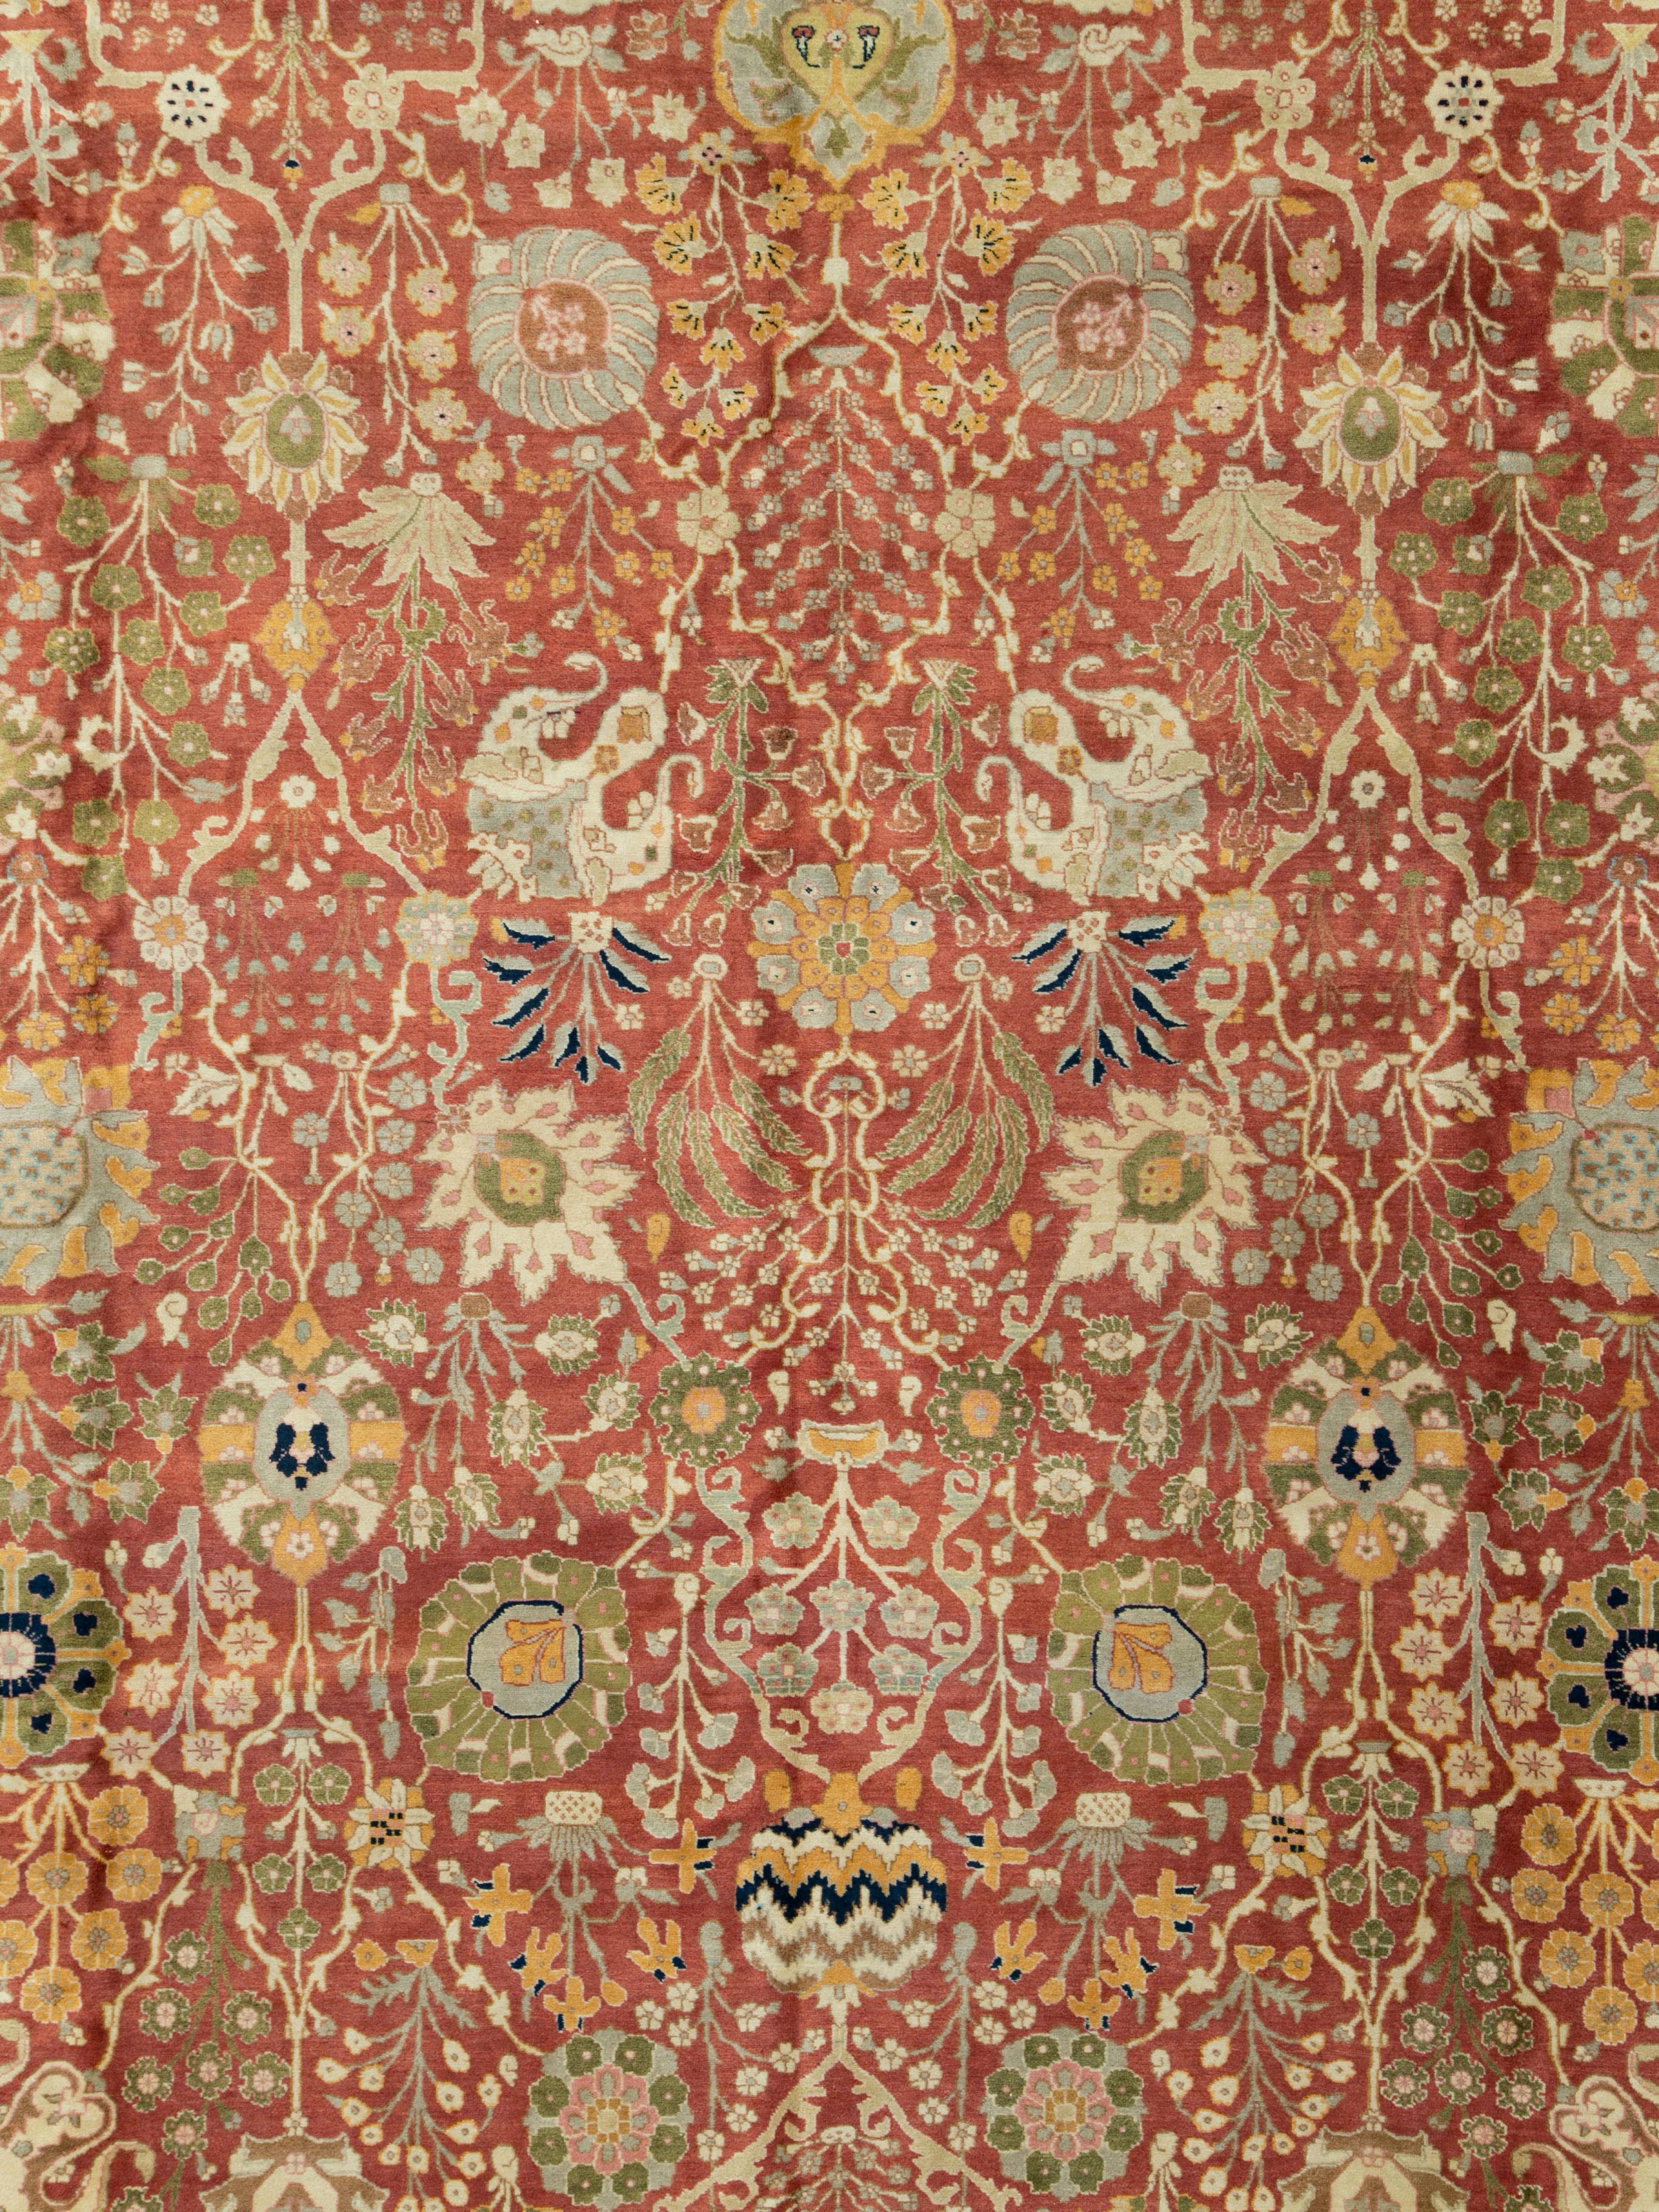 A vintage Persian Tabriz carpet from the mid-20th century.